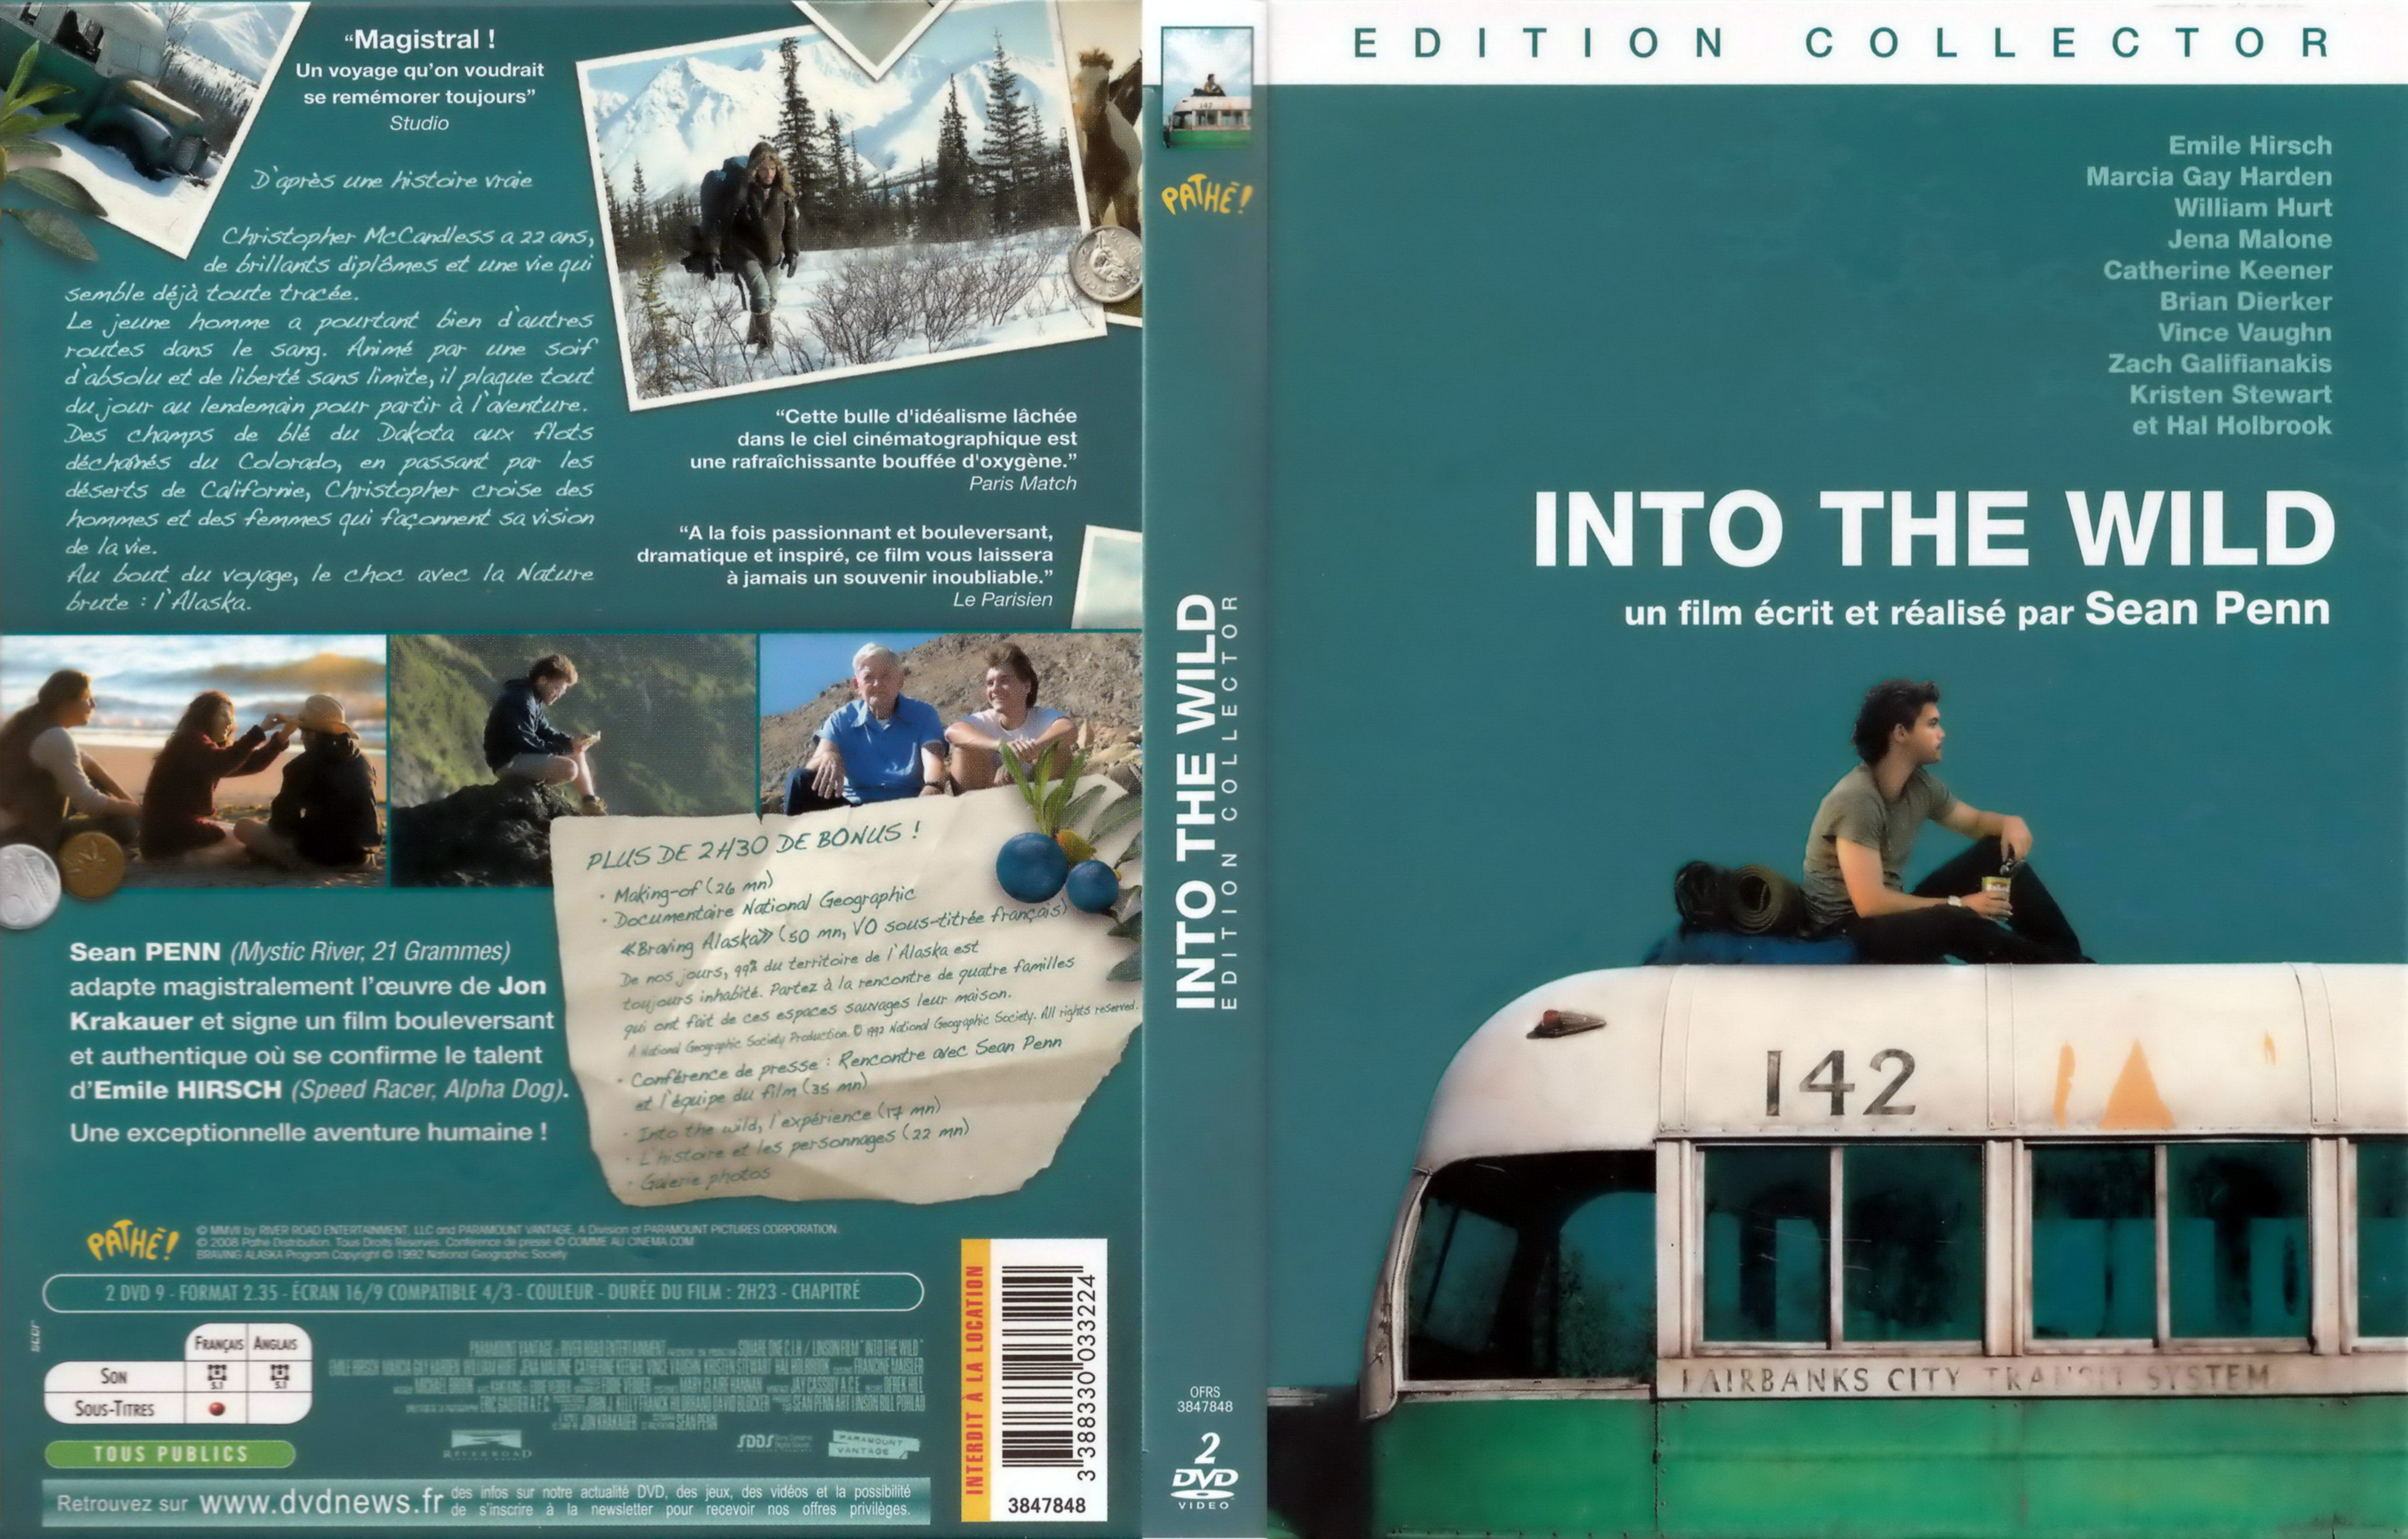 Jaquette DVD Into the wild v2